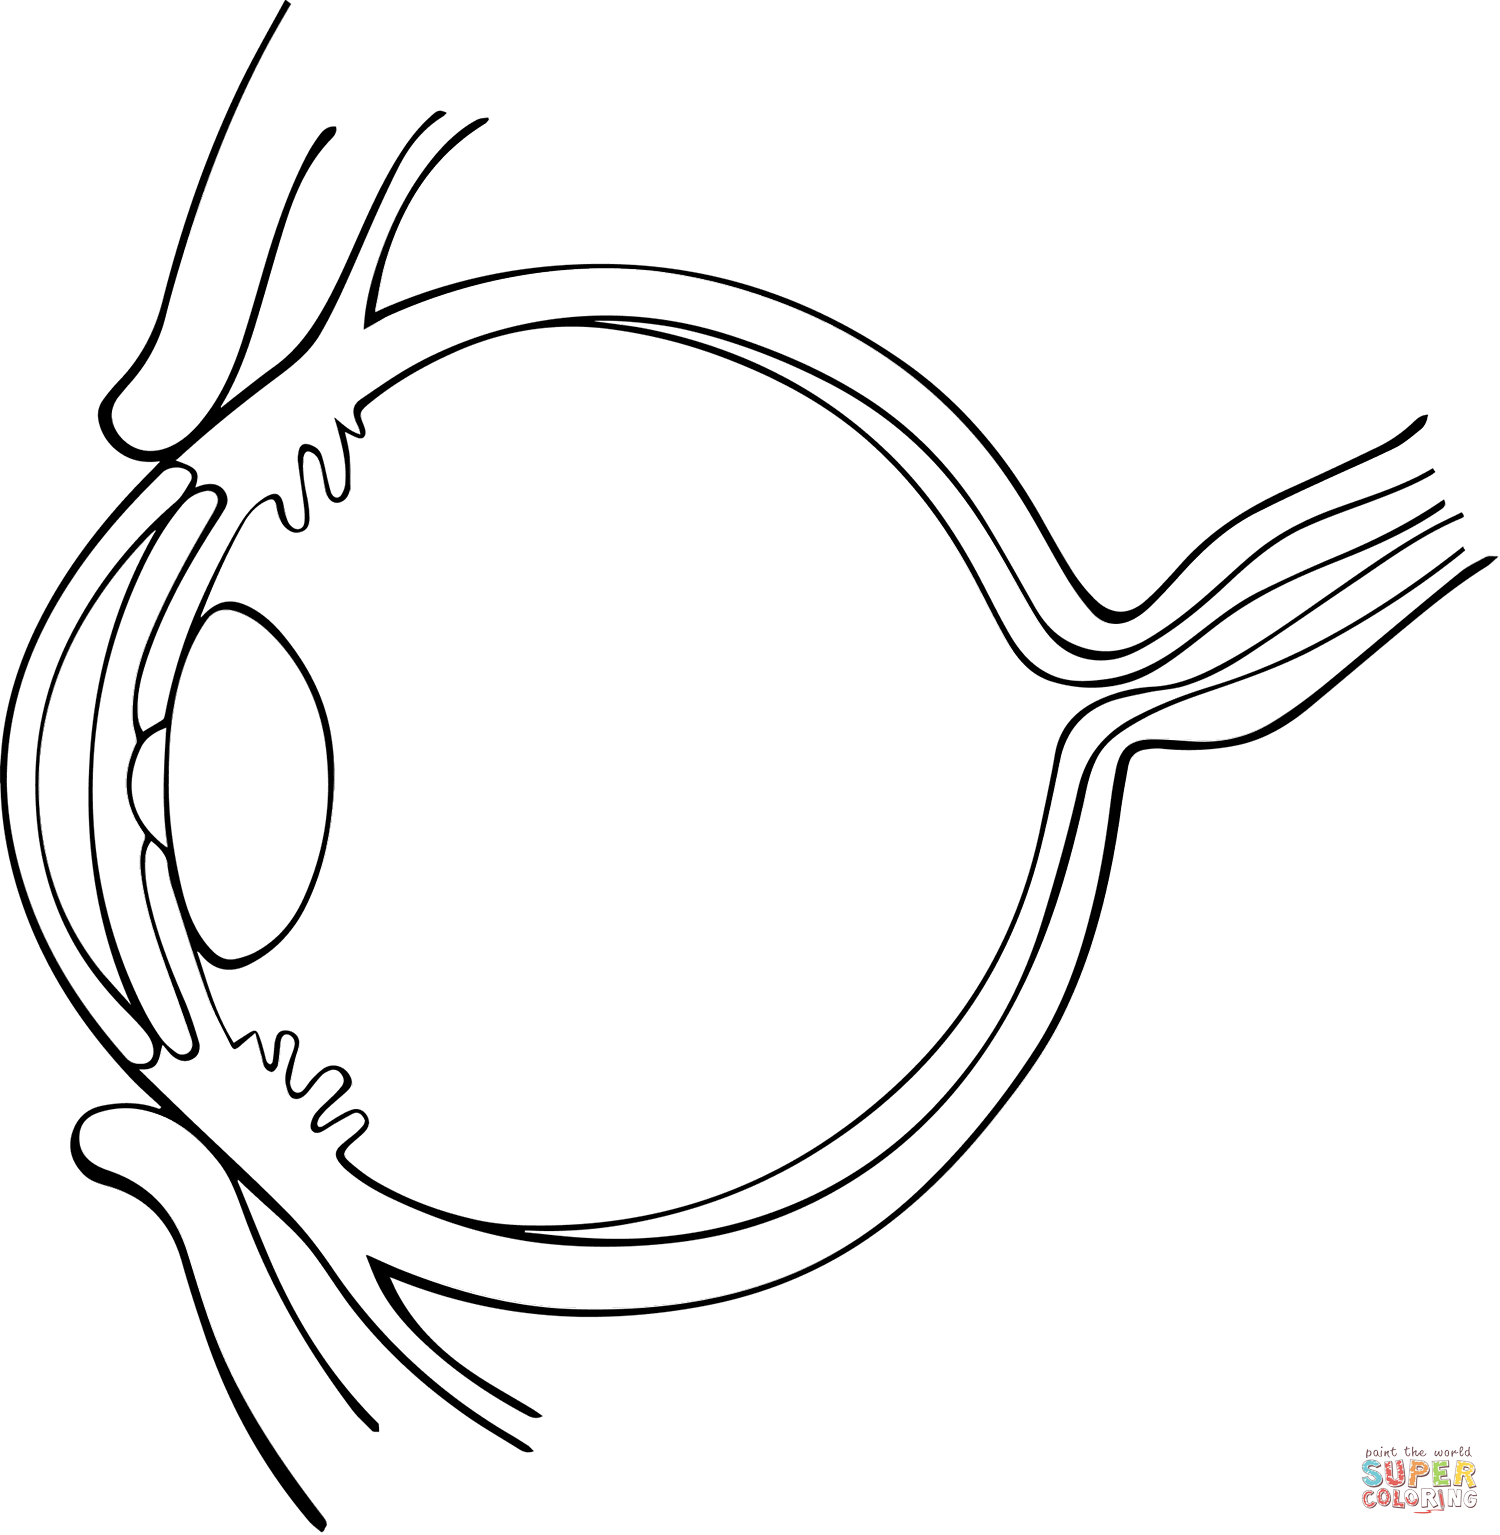 Side View of Human Eye coloring page | Free Printable Coloring Pages